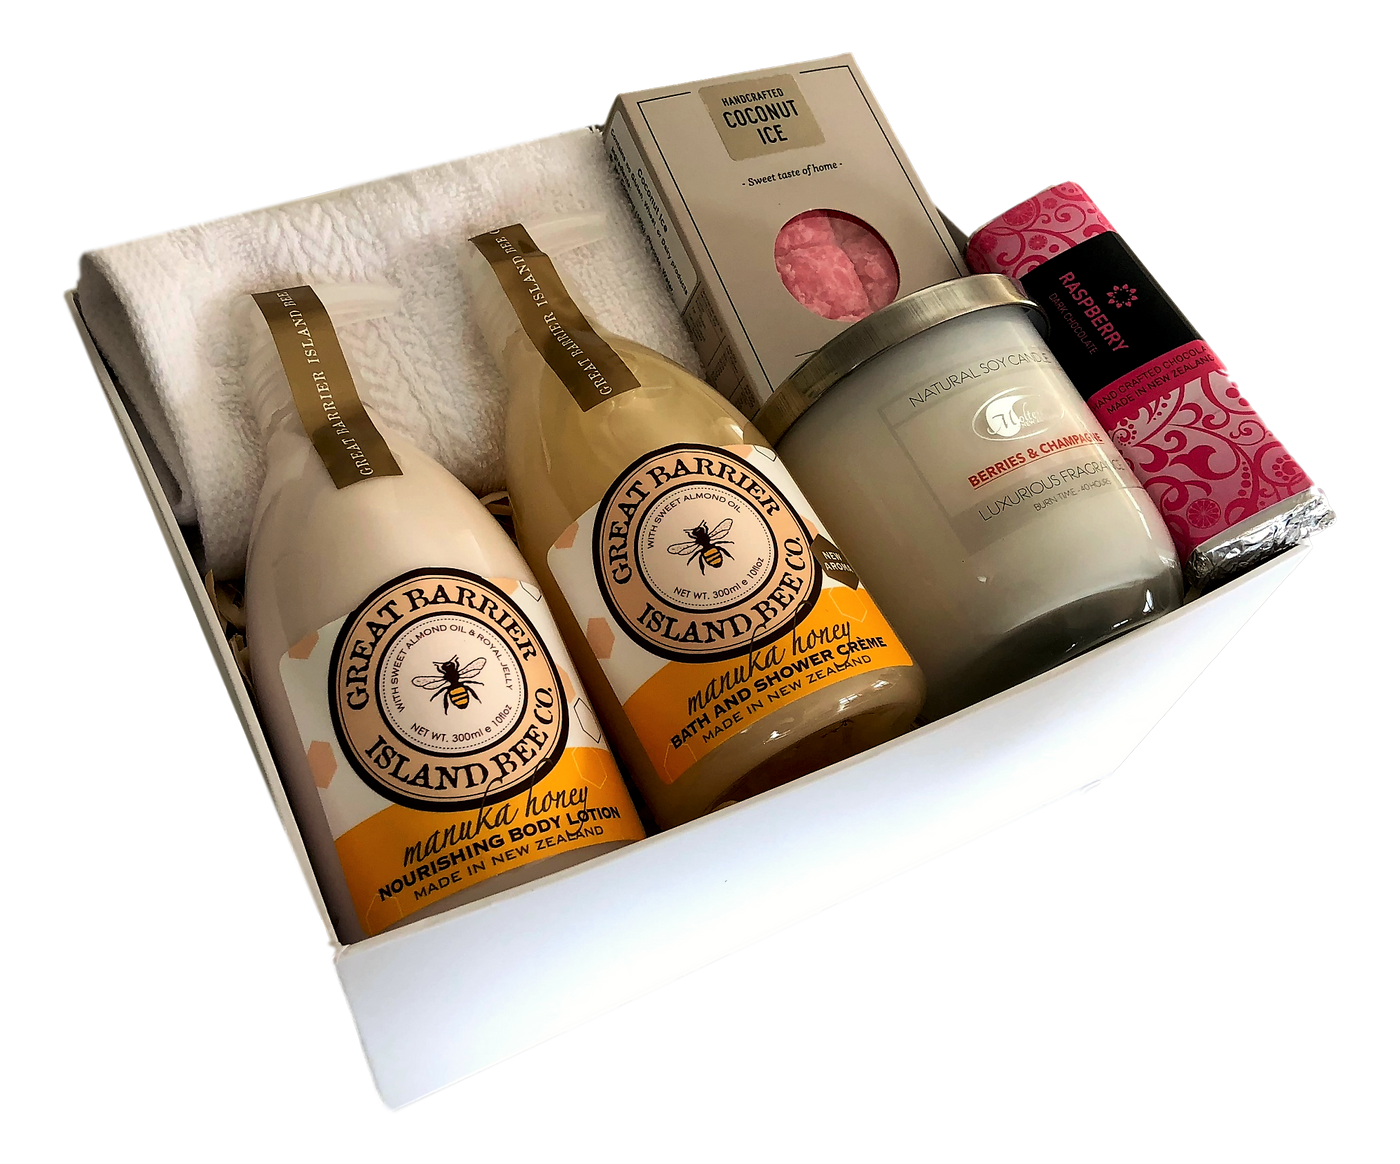 Luxurious Pamper Products for Women - Basket Creations NZ